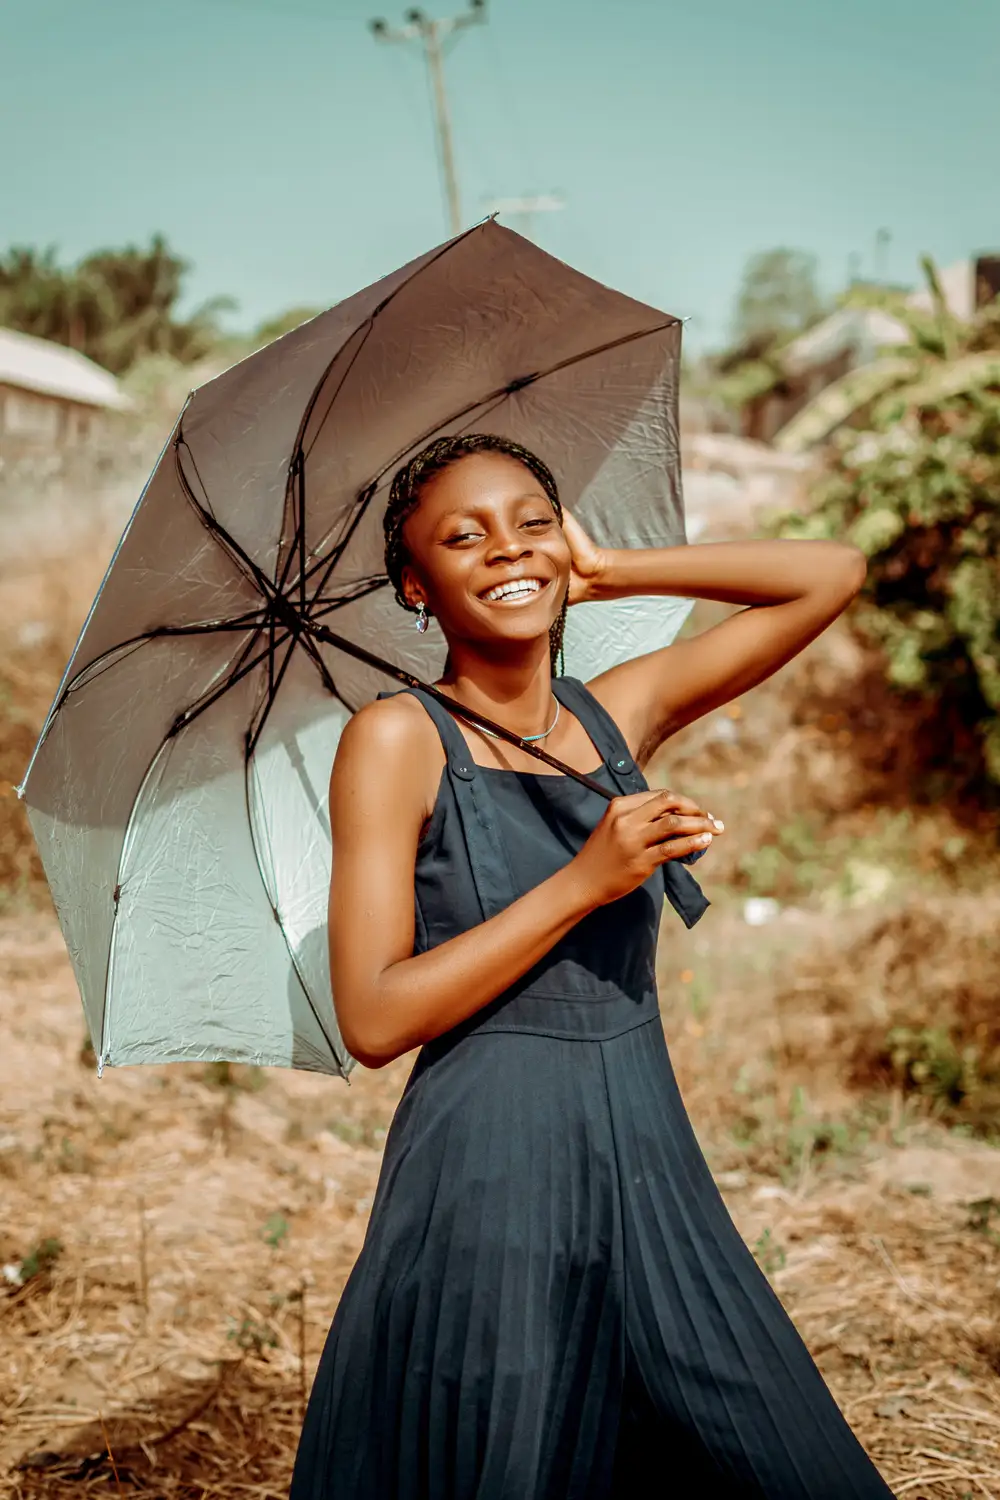 Smiling Young girl posing with an umbrella wearing a black dress